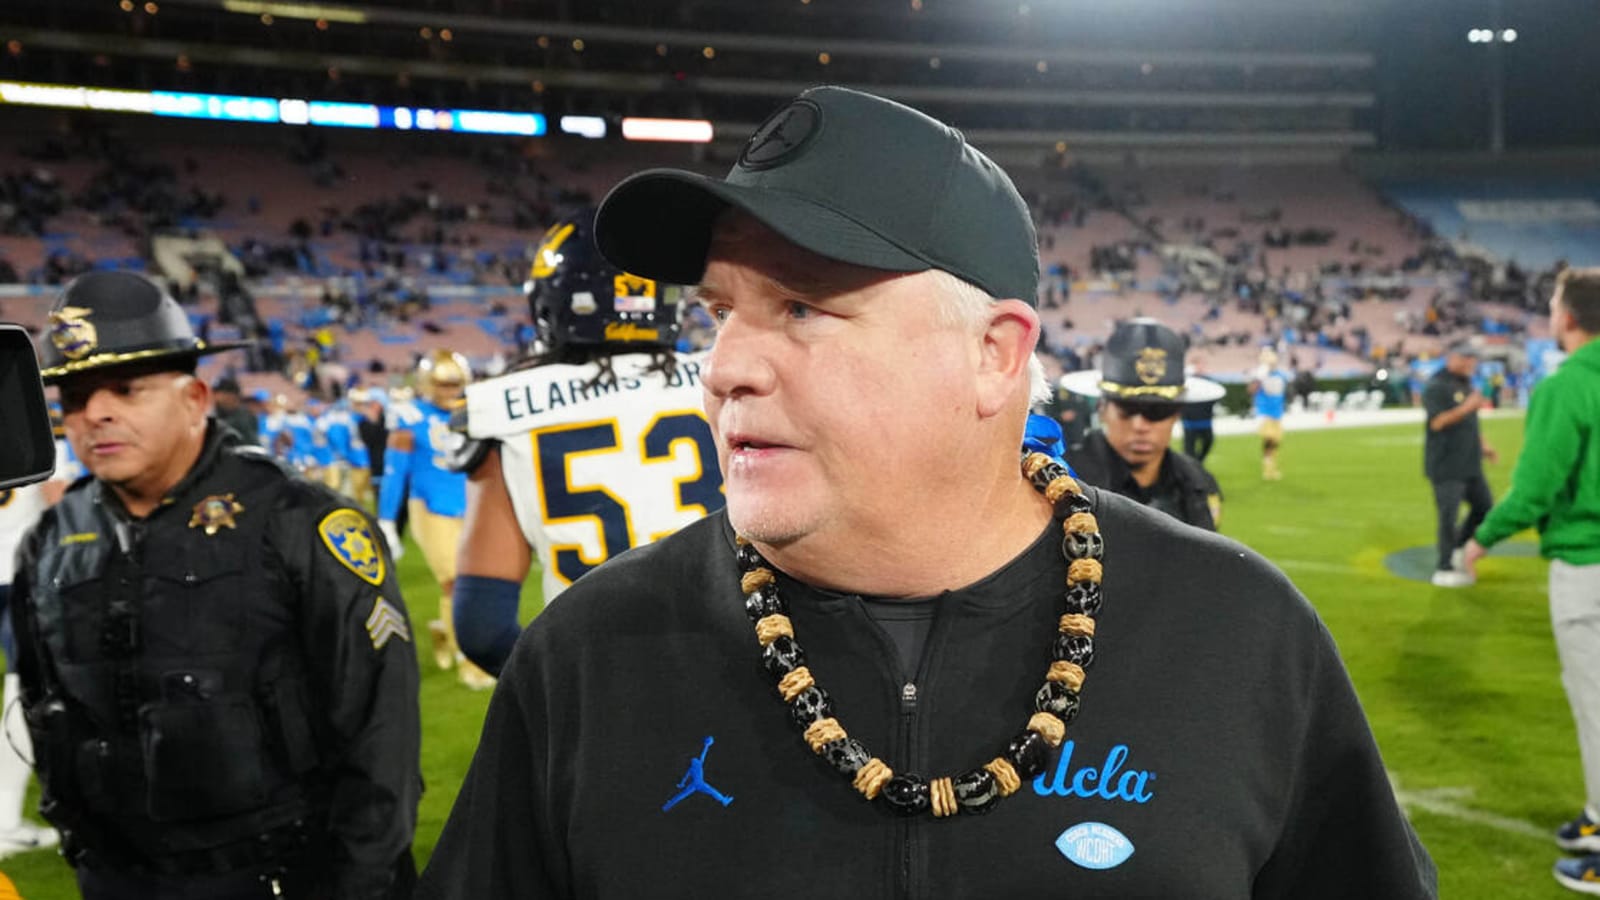 Report: Chip Kelly interviews with NFC team for OC job